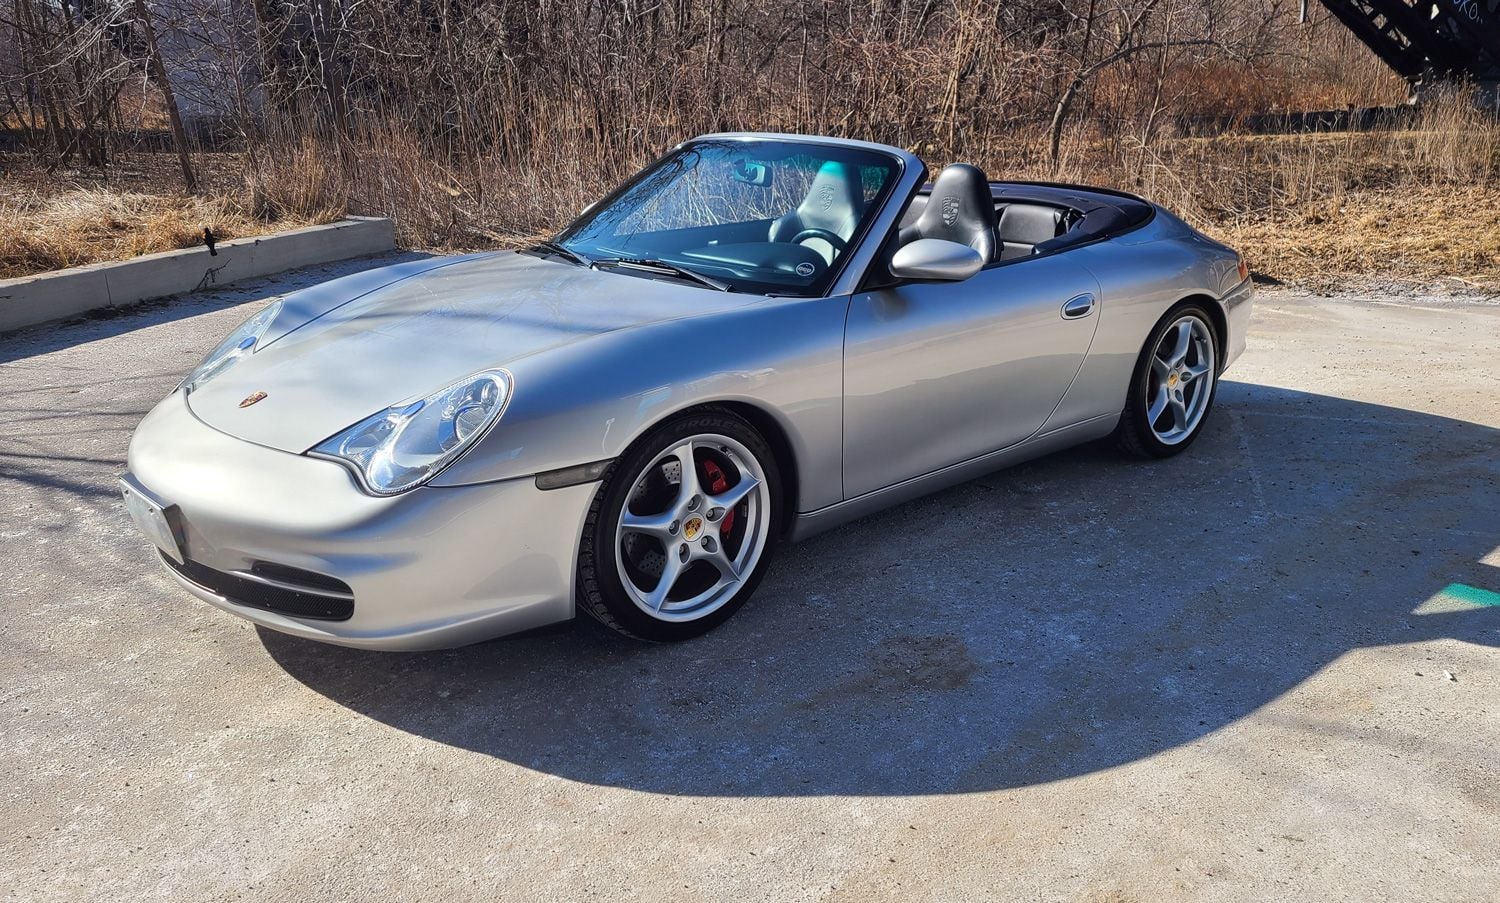 2002 Porsche 911 - 2002 911 C2 Cabriolet - Used - VIN WP0CA29972S650586 - 96,000 Miles - 6 cyl - 2WD - Manual - Convertible - Silver - Toronto, ON M6P2Z6, Canada